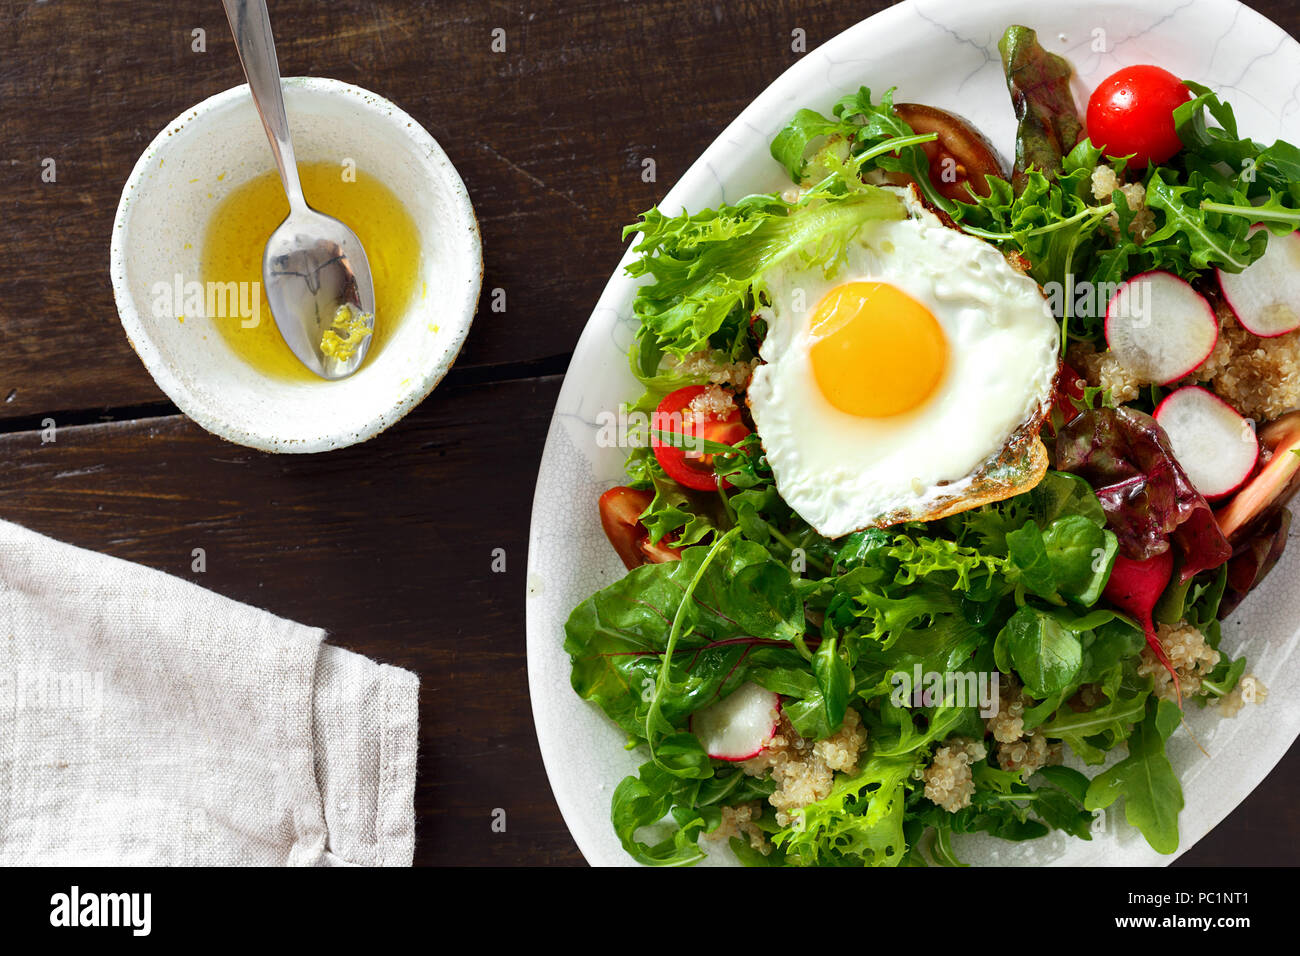 Plate fresh salad with white quinoa, fried egg and sauce on wooden table. Healthy food clean eating Stock Photo